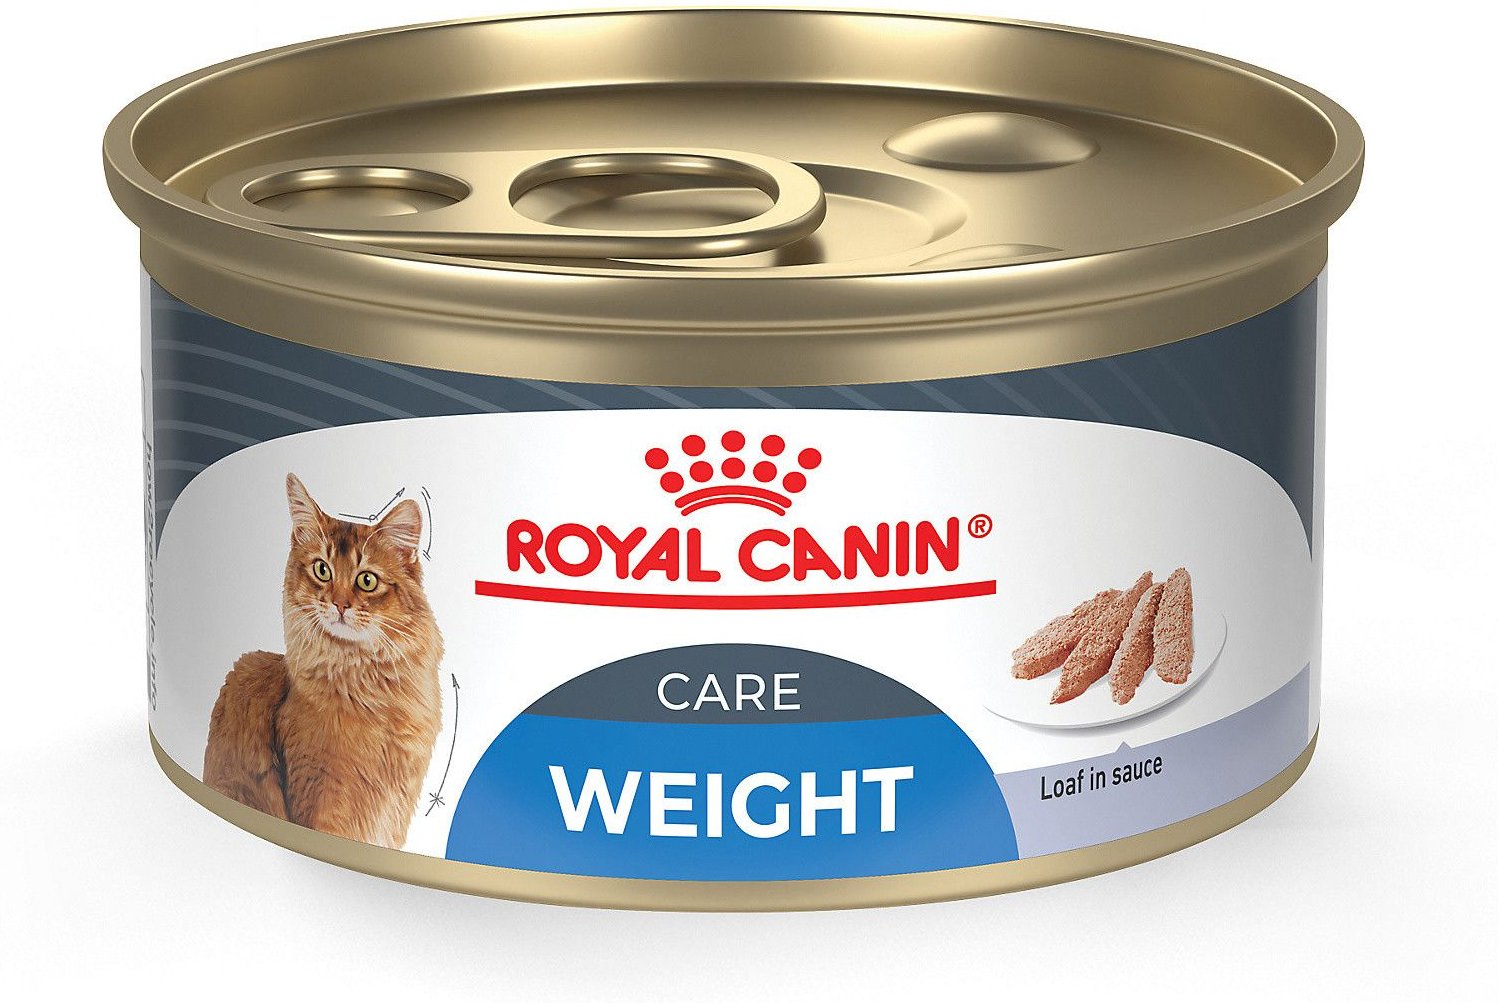 ROYAL CANIN Feline Weight Care Loaf in Sauce Canned Cat Food, 3oz